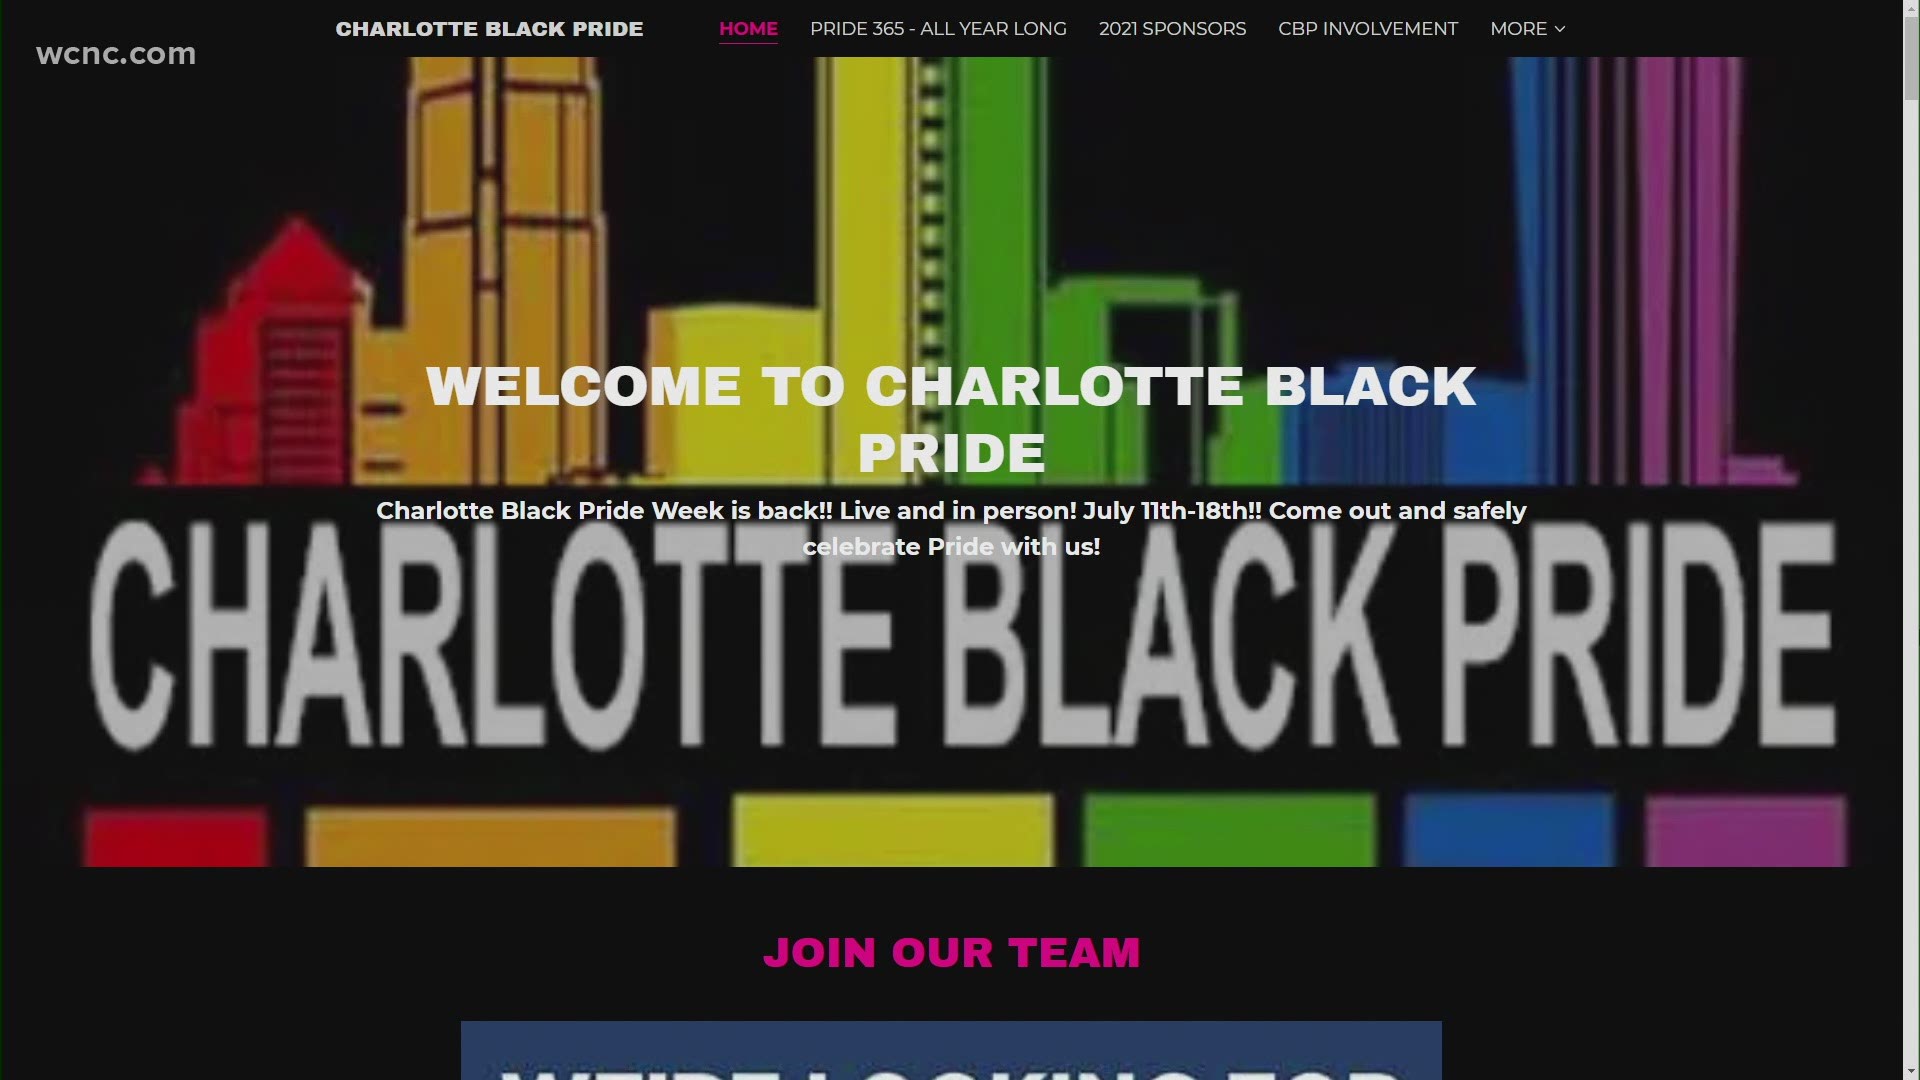 Events will be going on all week throughout Charlotte. Details about daily events and more can be found at https://charlotteblackpride.org/